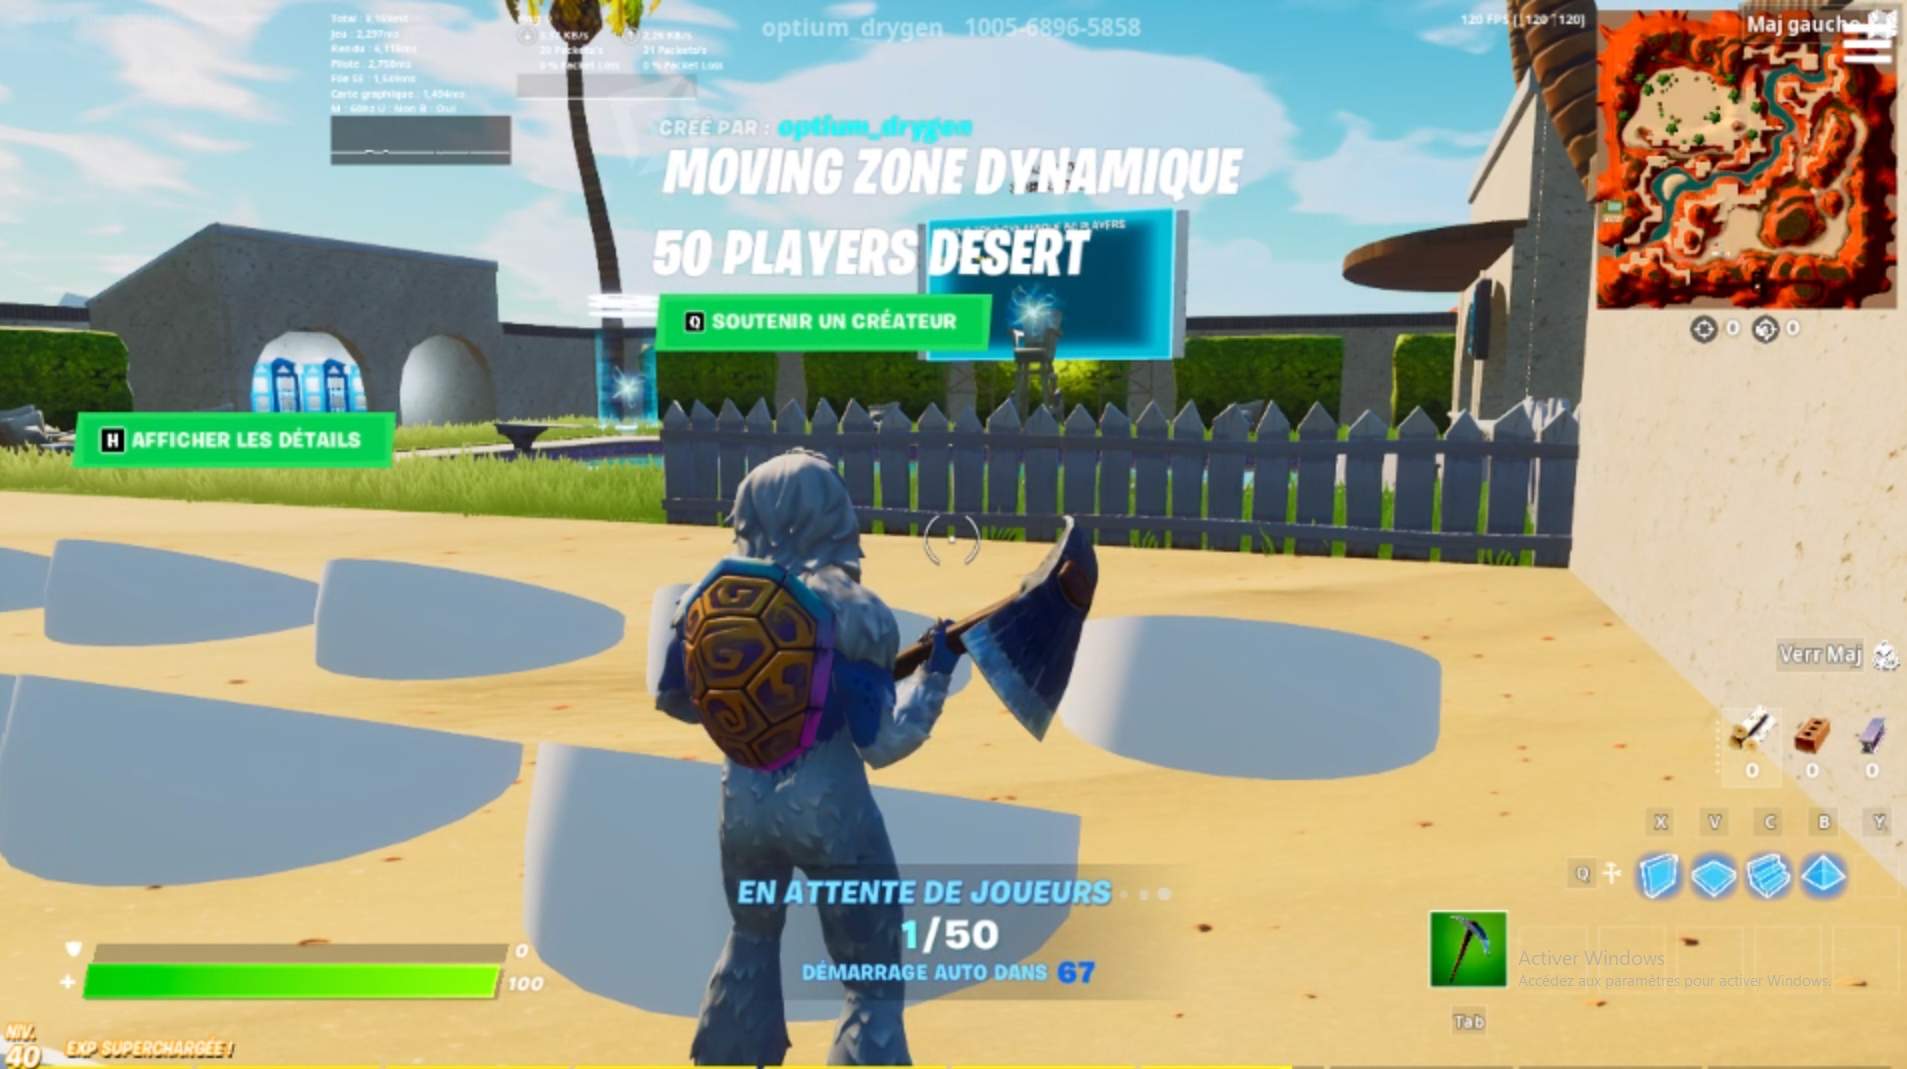 MOVING ZONE DYNAMIQUE 50 PLAYERS DESERT